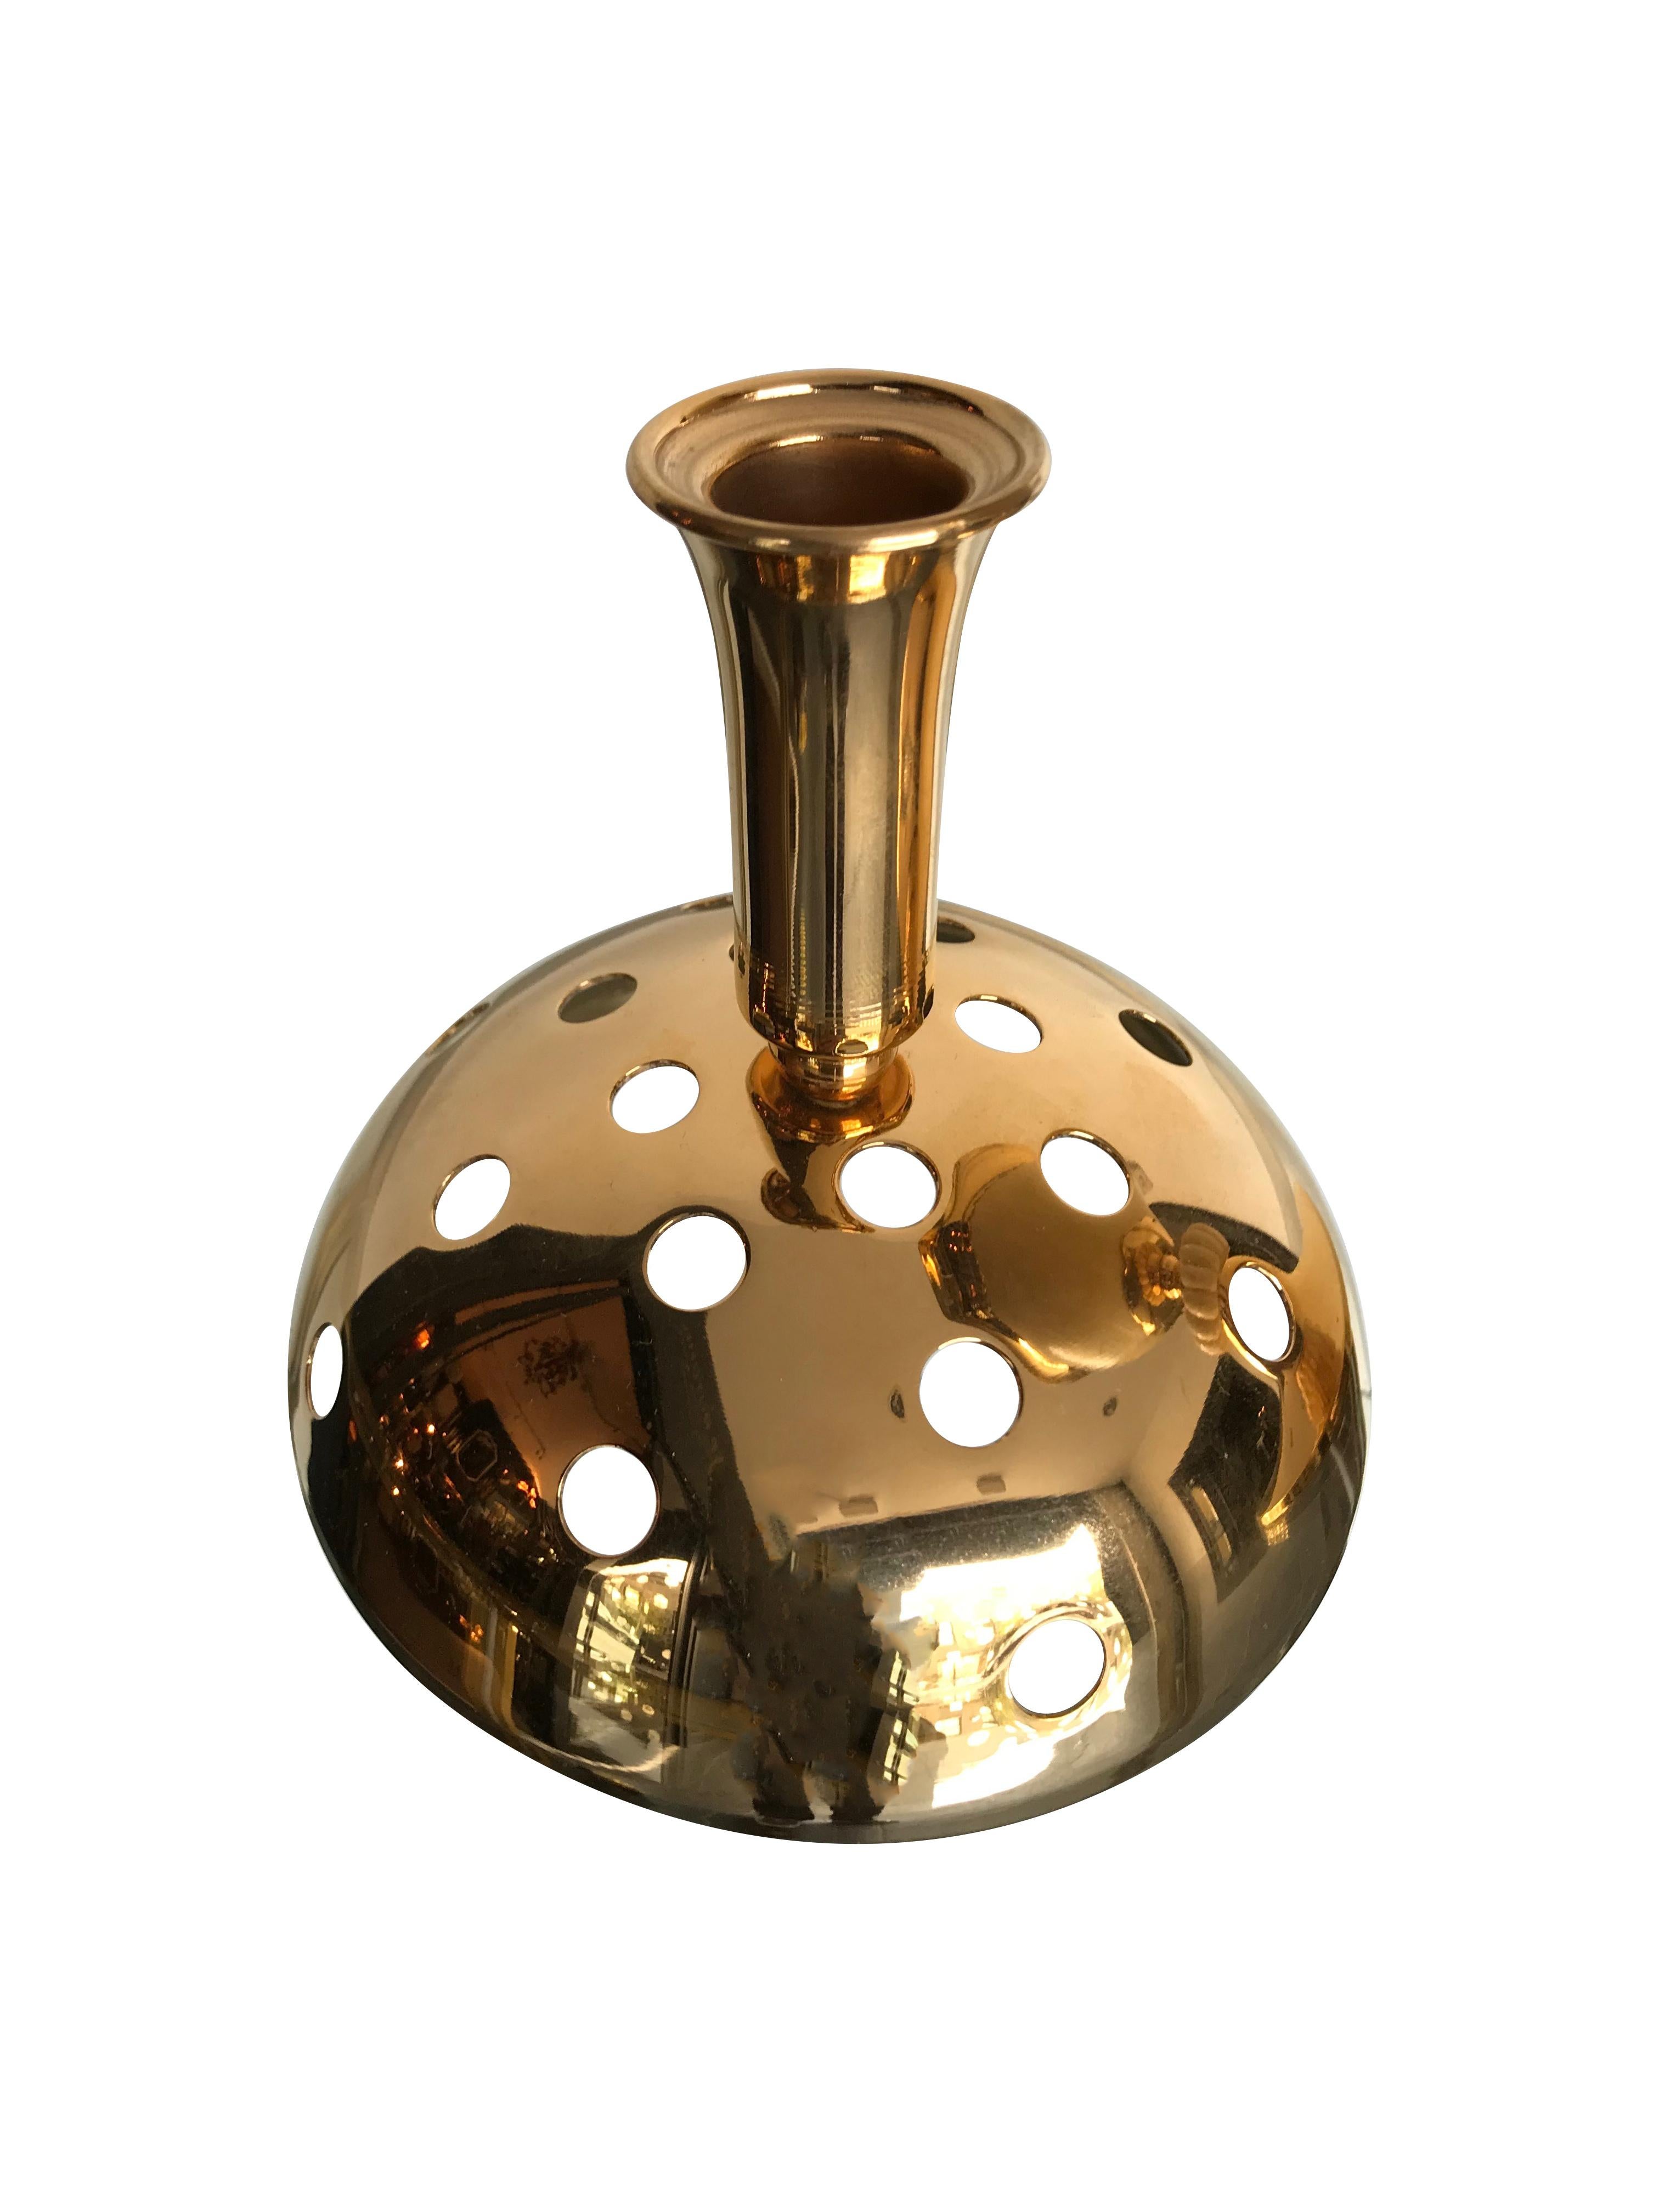 French 1970s Potpourri Holder in Gilt Metal with Real Ostrich Egg by Christian Dior